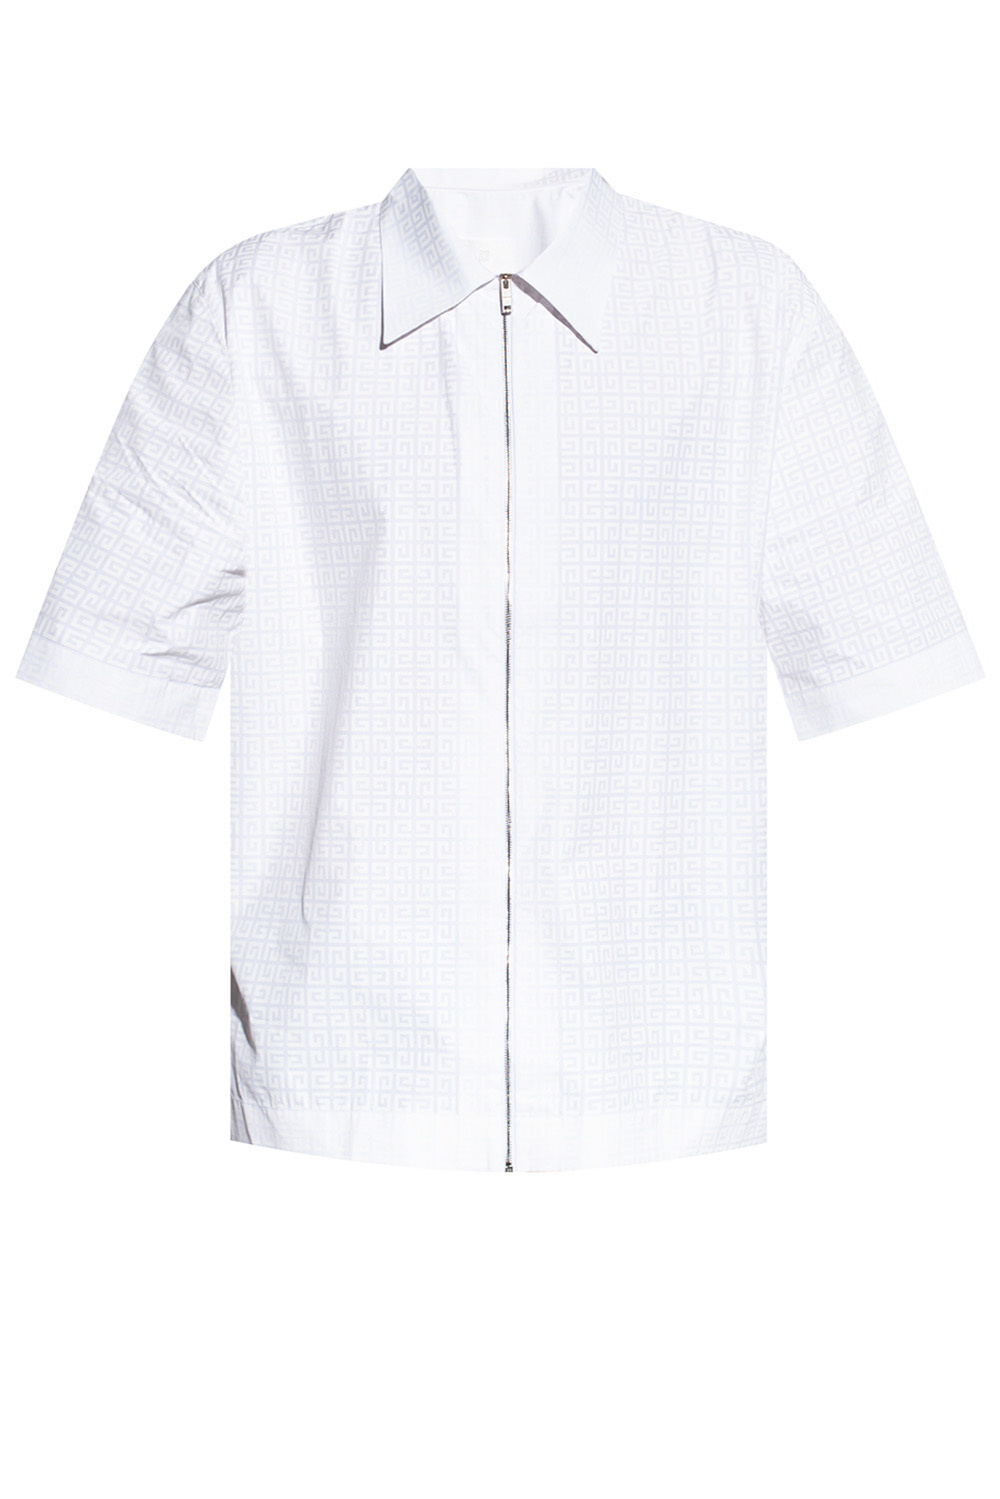 givenchy shoes Monogrammed shirt